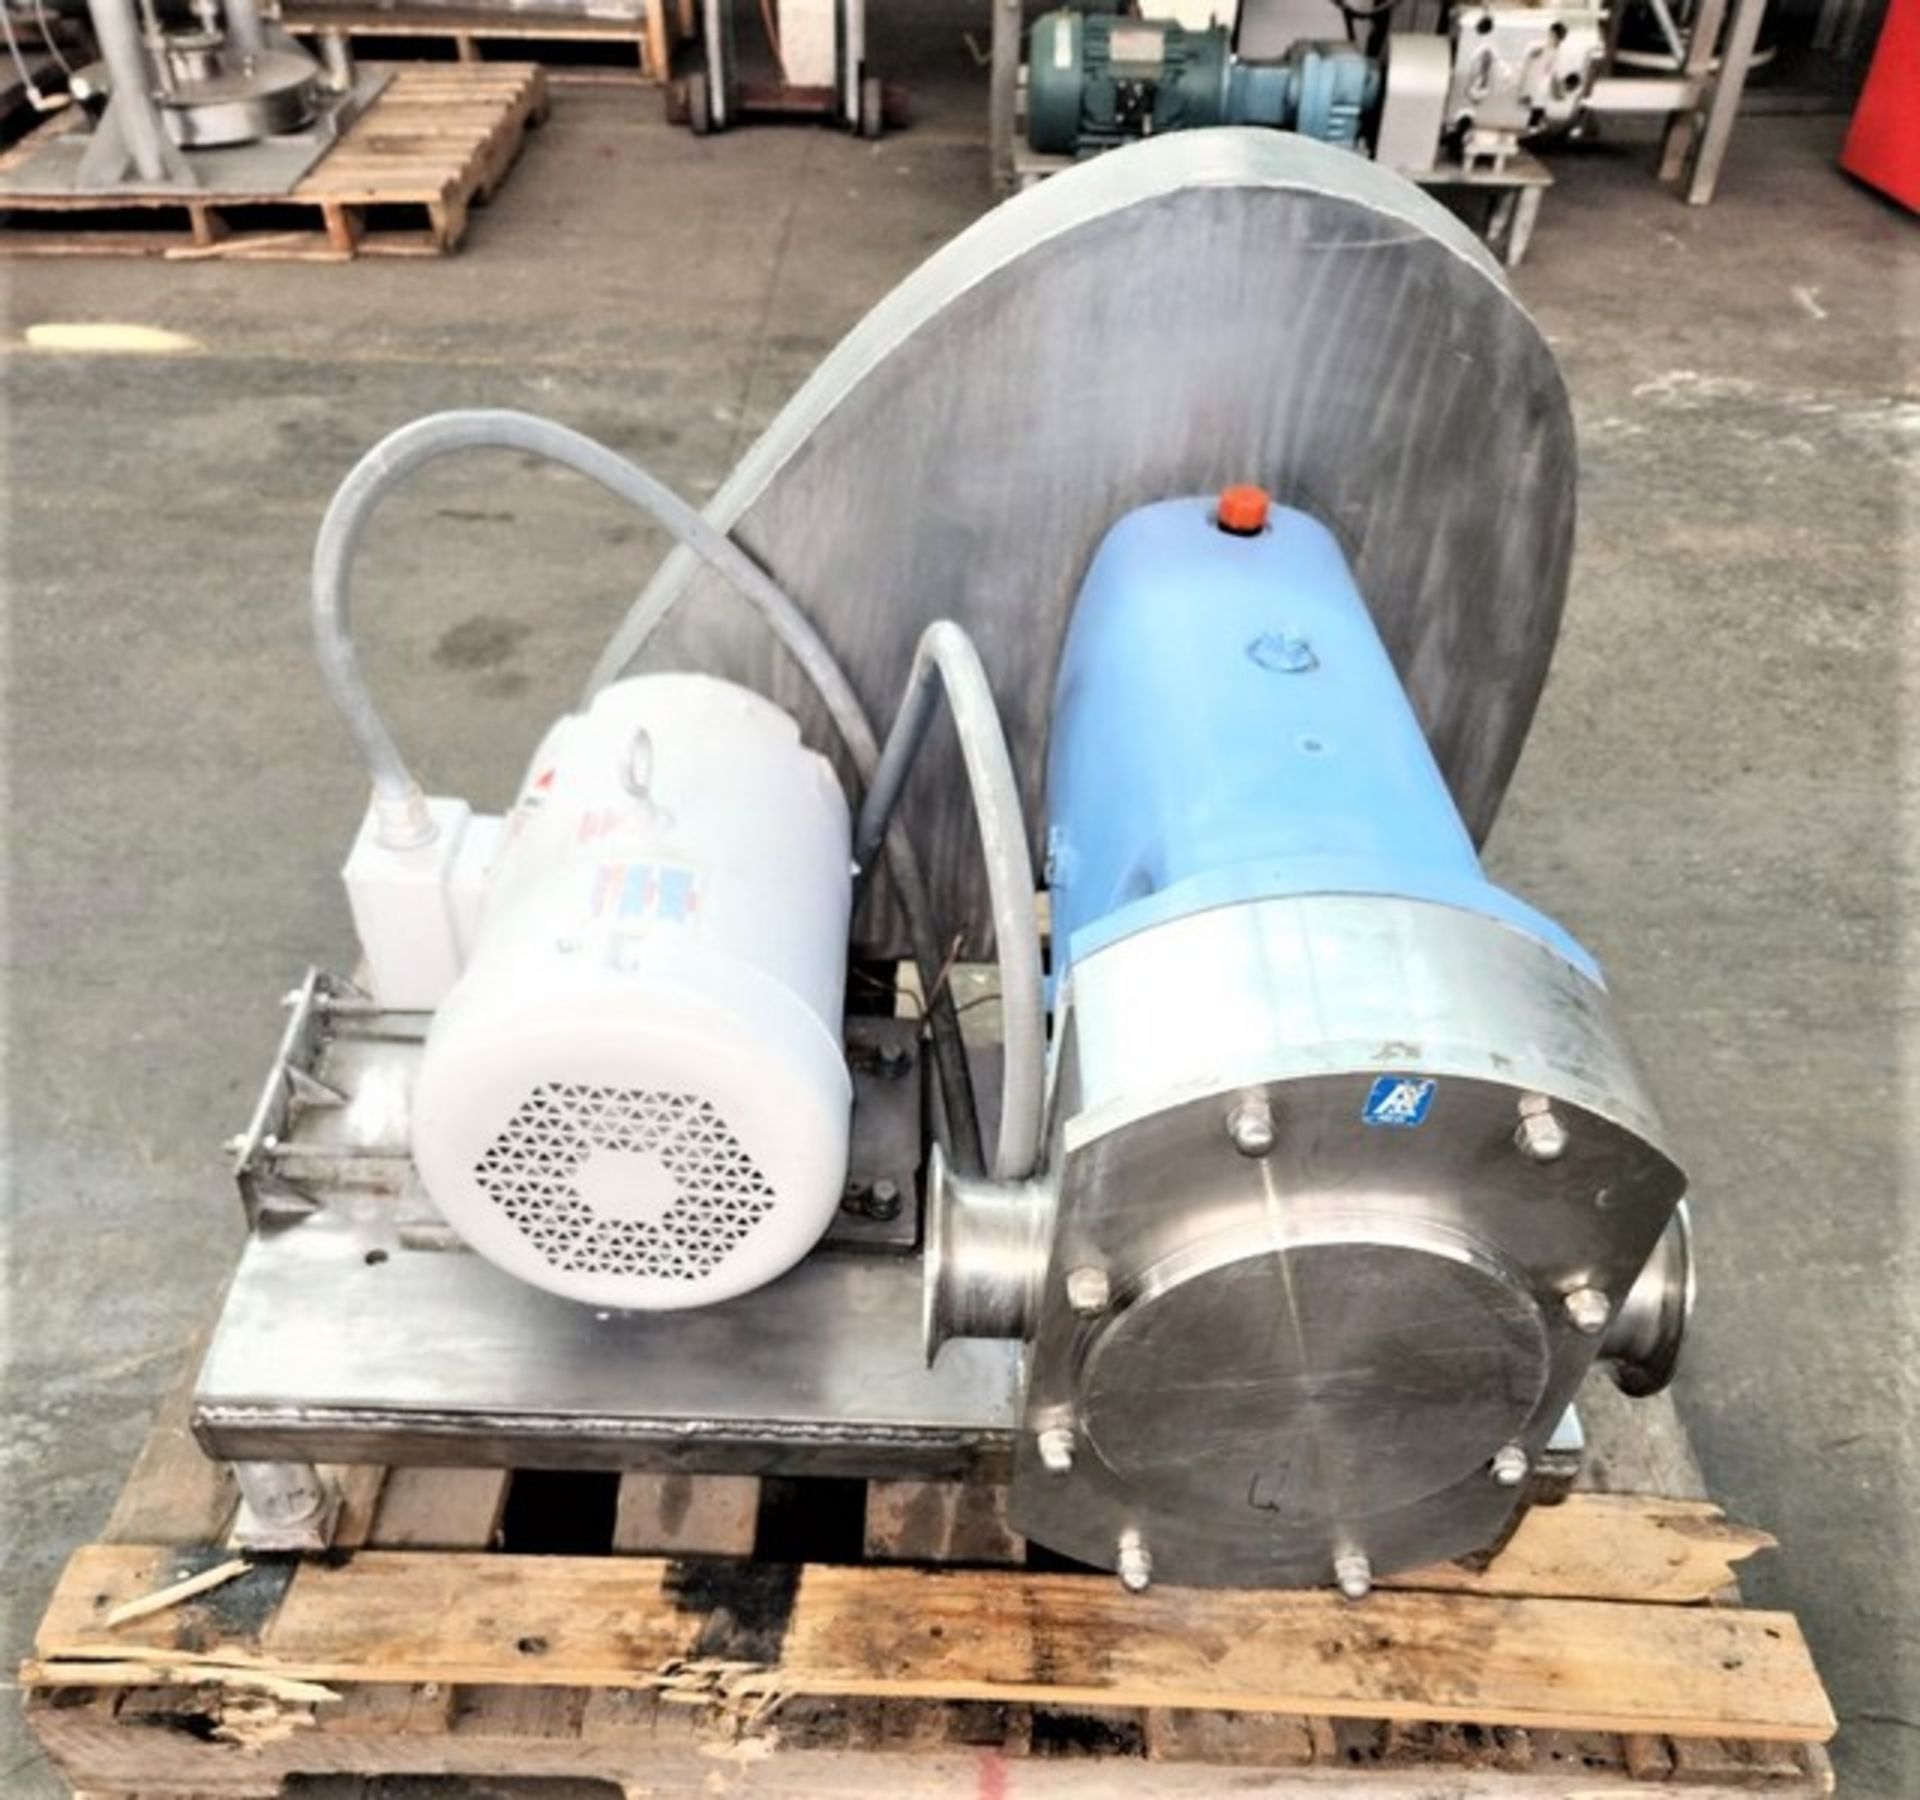 G H (Alfa Laval) 7.5 hp 4" S/S Sanitary Positive Displacement Pump, Model 822, S/N 95-8-50174 with